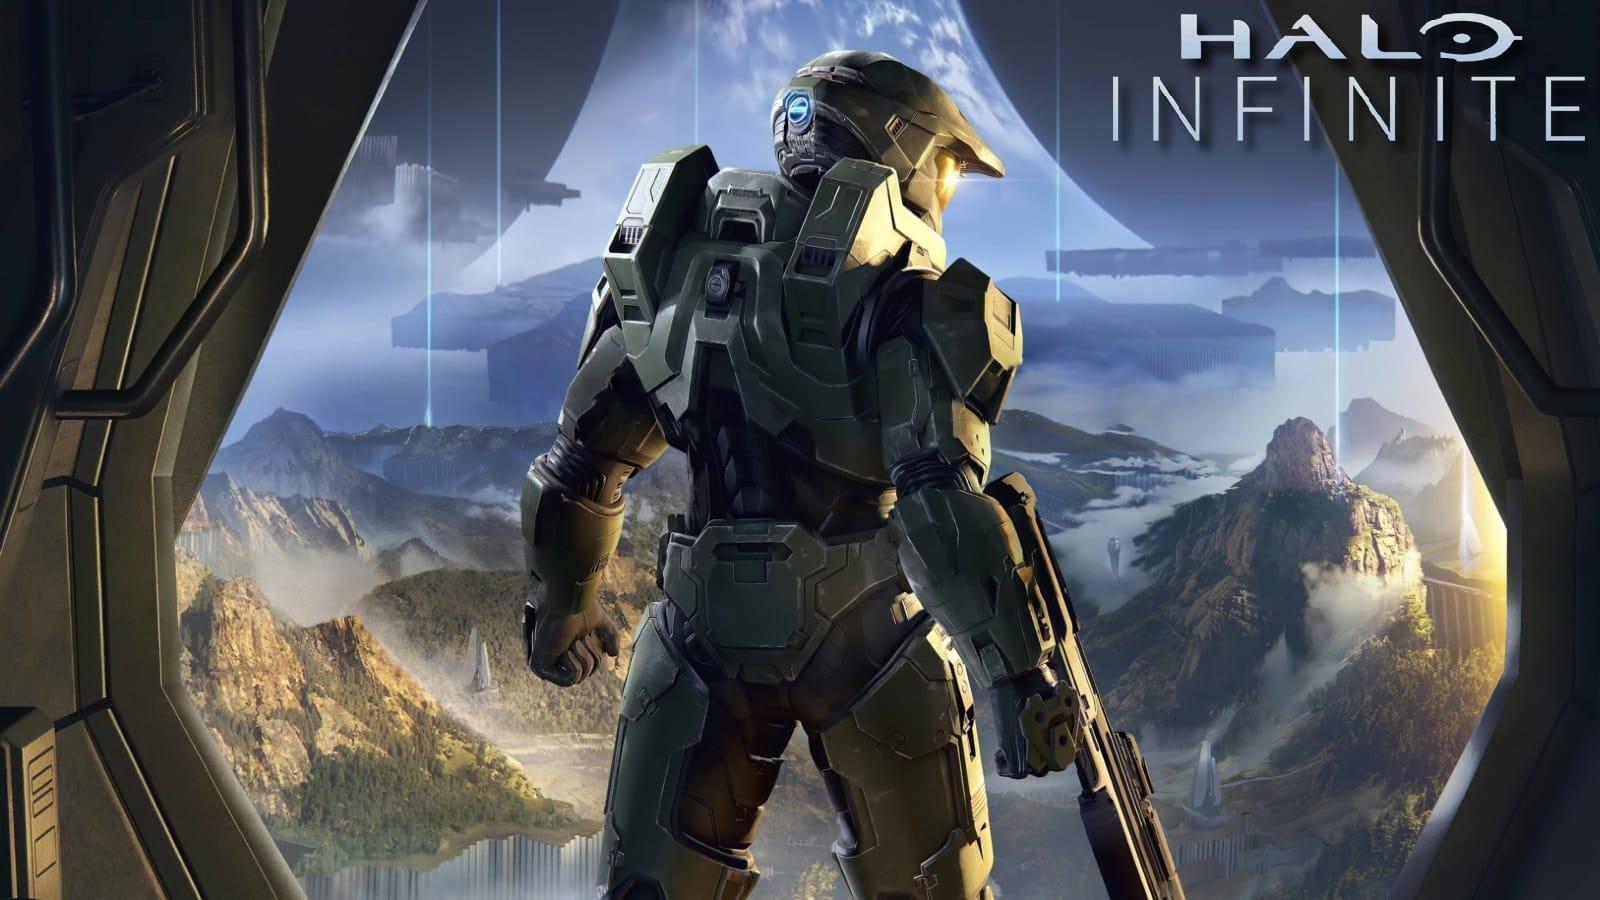 Halo Infinite Master Chief Zeta Halo Open World Campaign Story Missions Replayability Final Game Logo